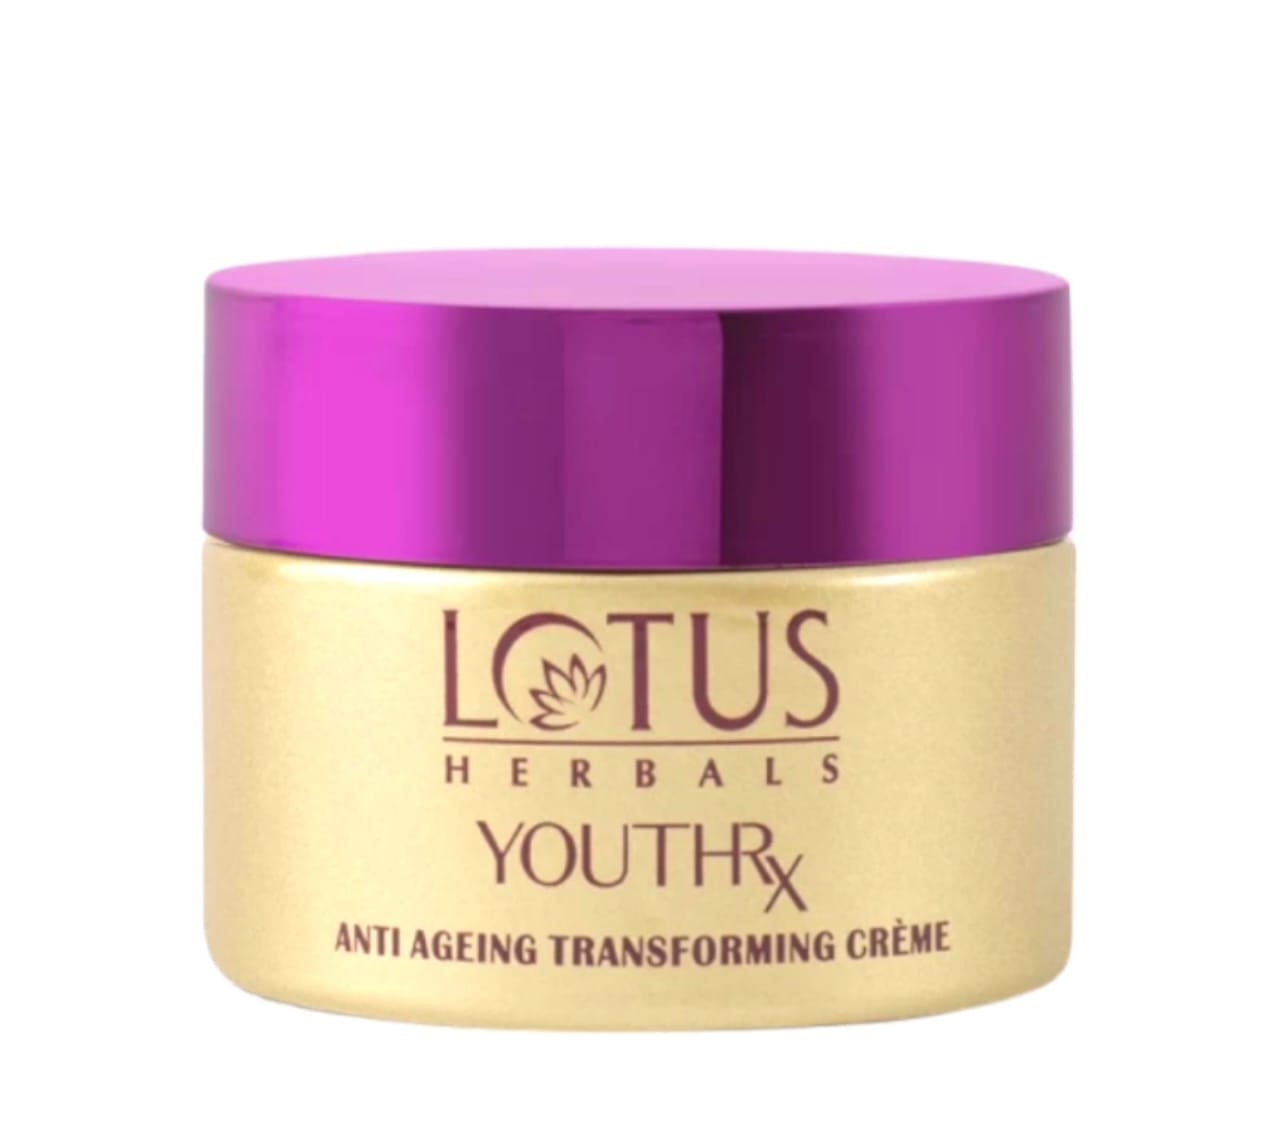 Lotus Herbals Youth Rx Anti Ageing Transforming Day cream